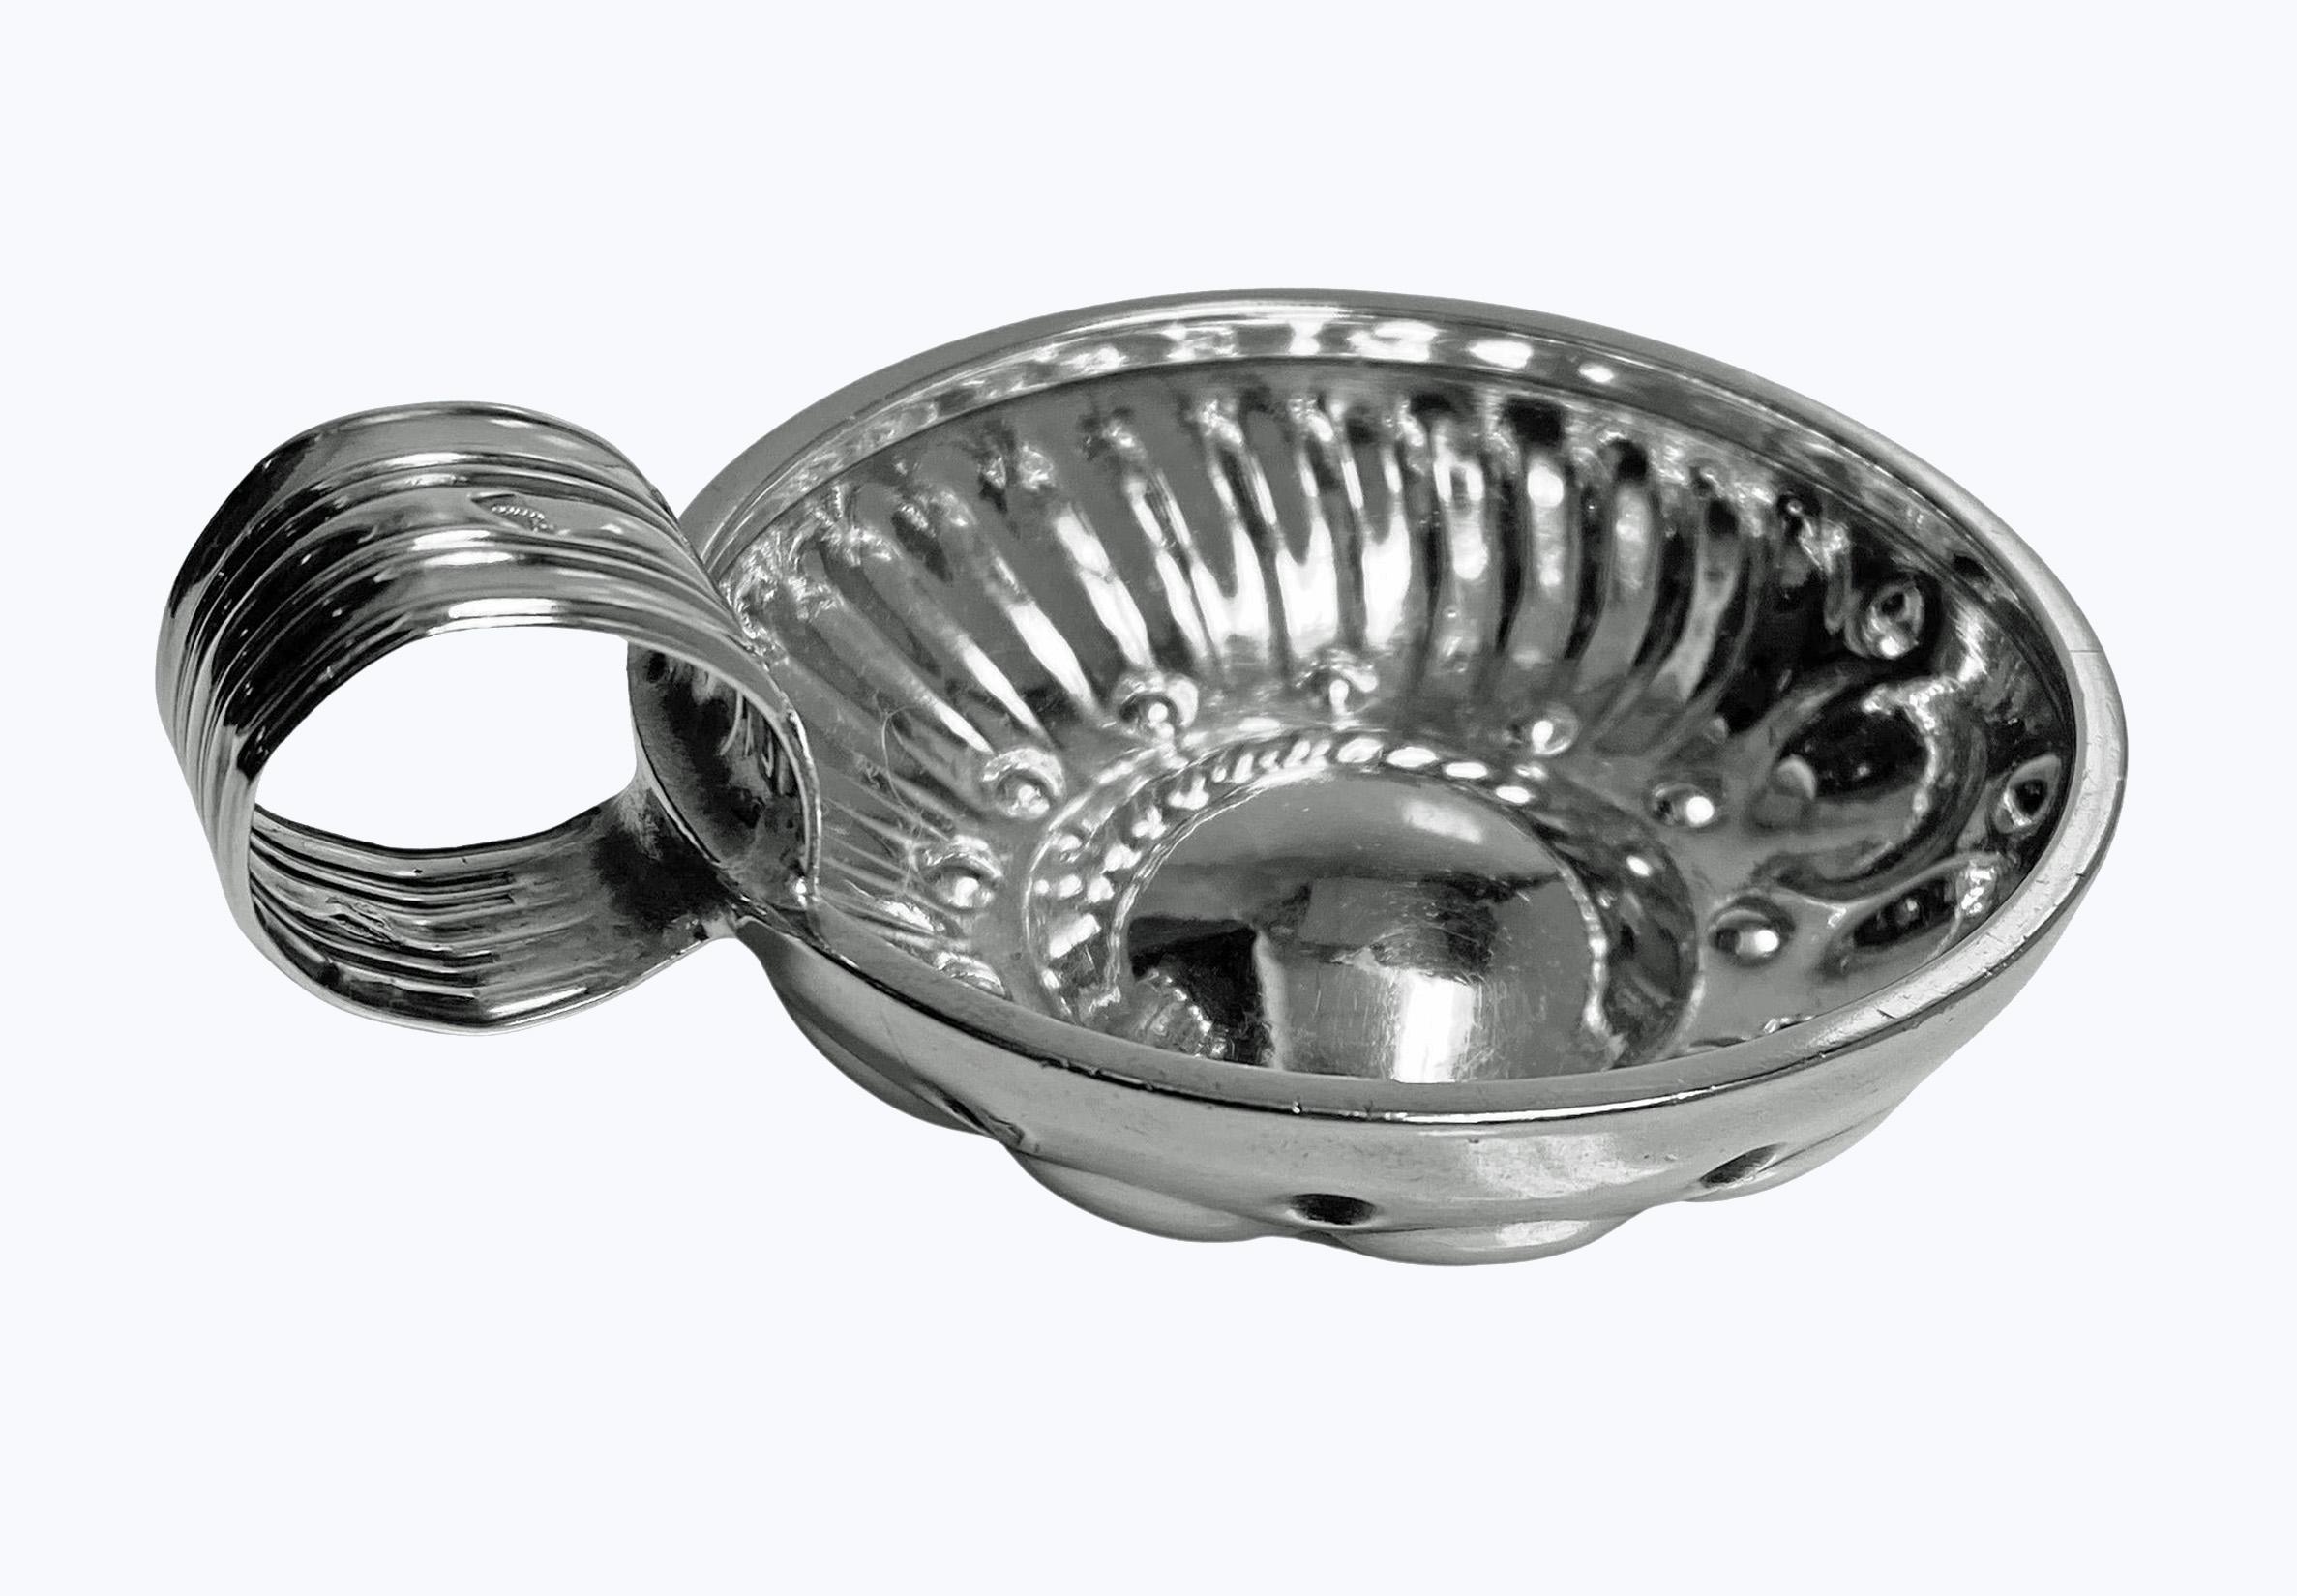 Antique French silver wine taster tastevin circa 1880, CT for Cesar Tonnelier, Minerva head 1st std. The tastevin of usual form, the lower part of bowl with a surround of concave and swirl lobate style decoration, ribbed thumb piece handle. Marked